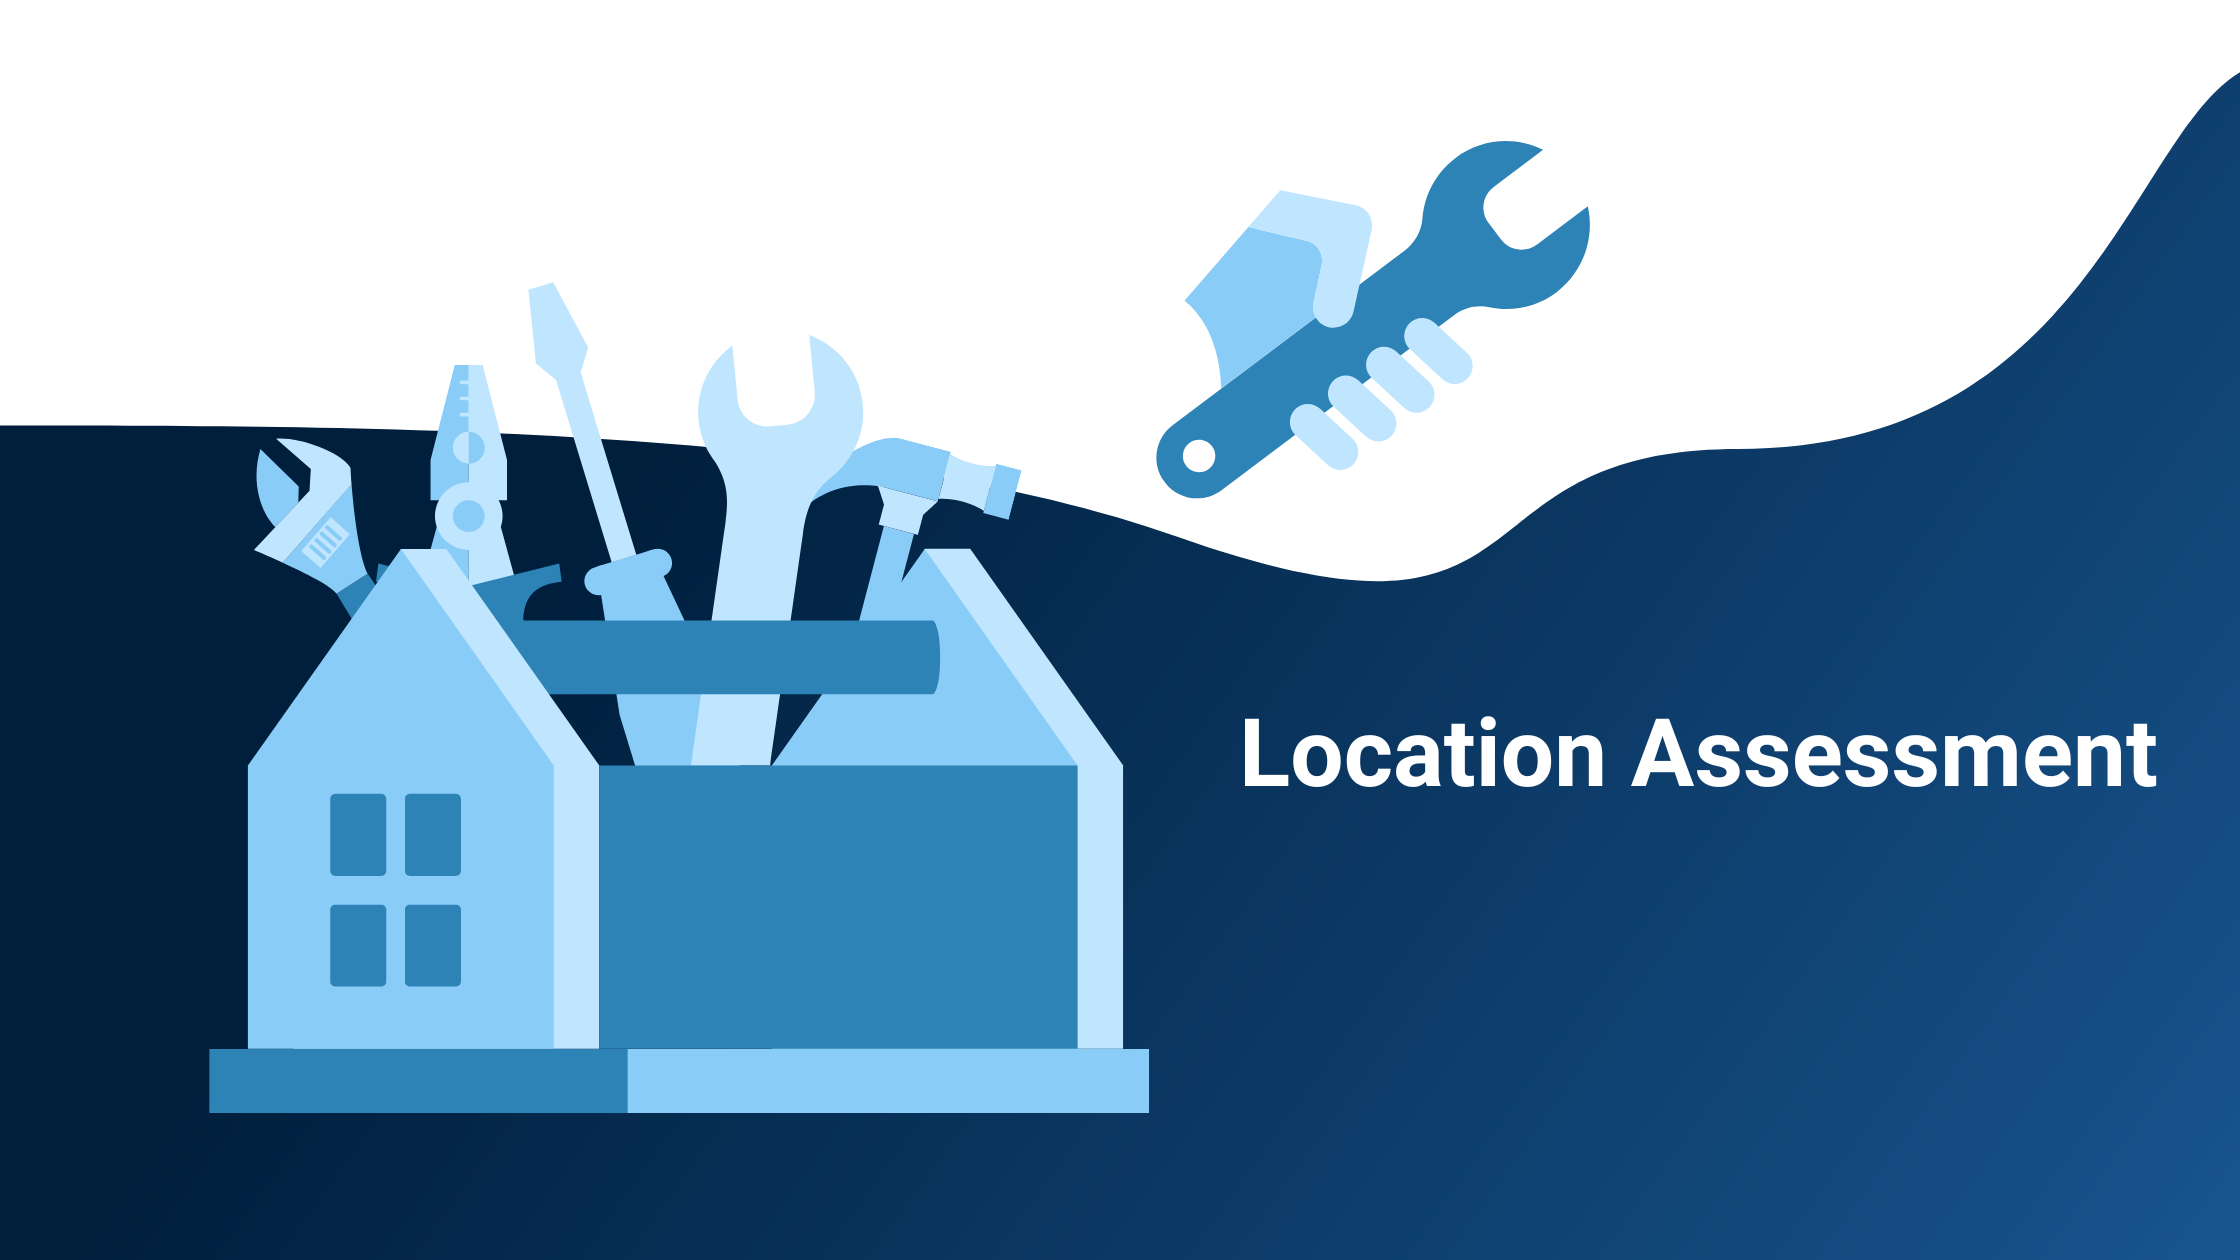 Our Toolkit – Part 2: Location Assessment